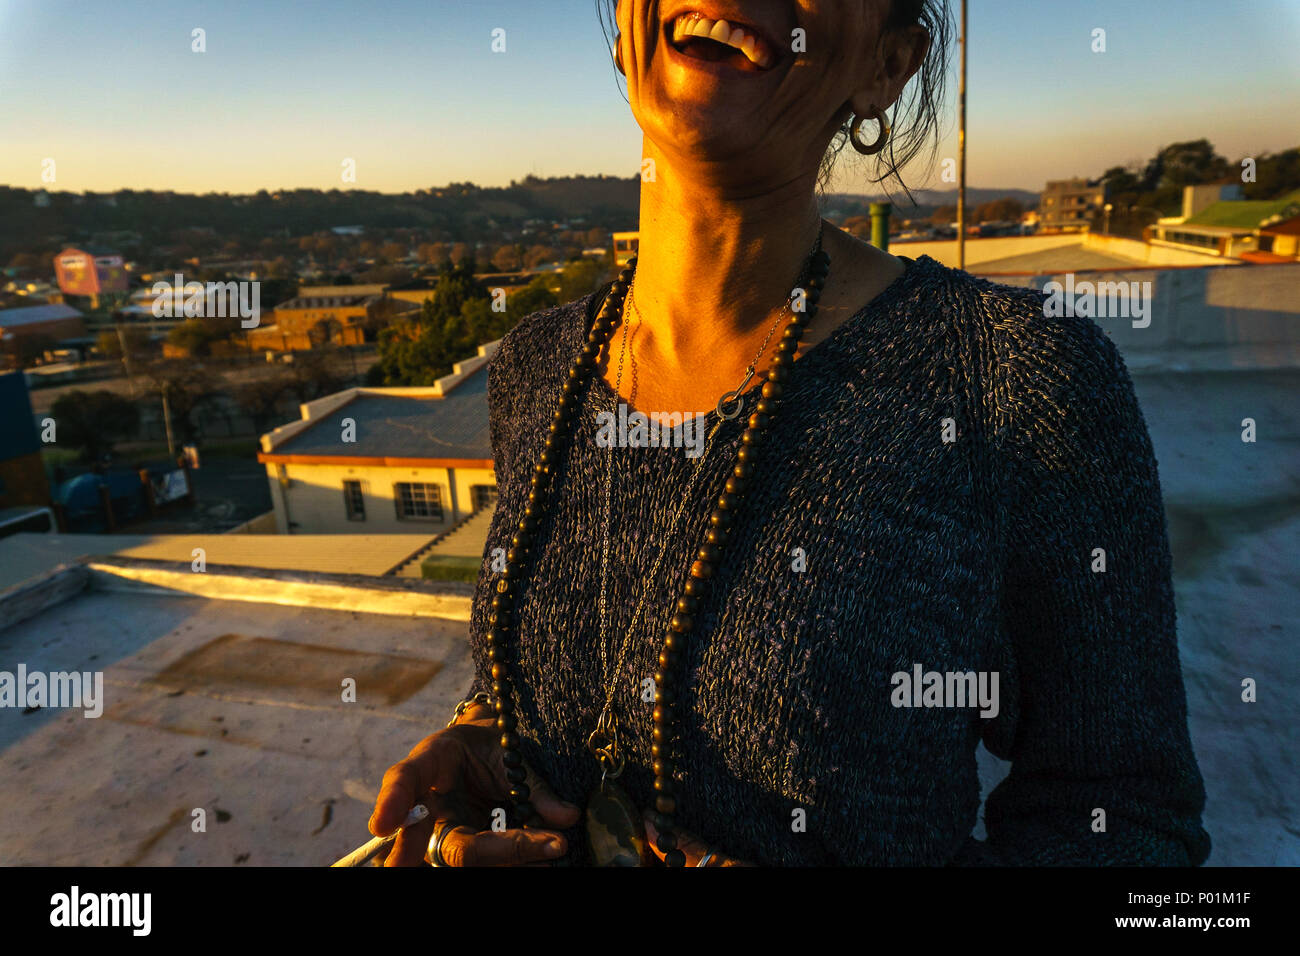 A woman with a marijuana cigarette in Johannesburg, South Africa Stock Photo